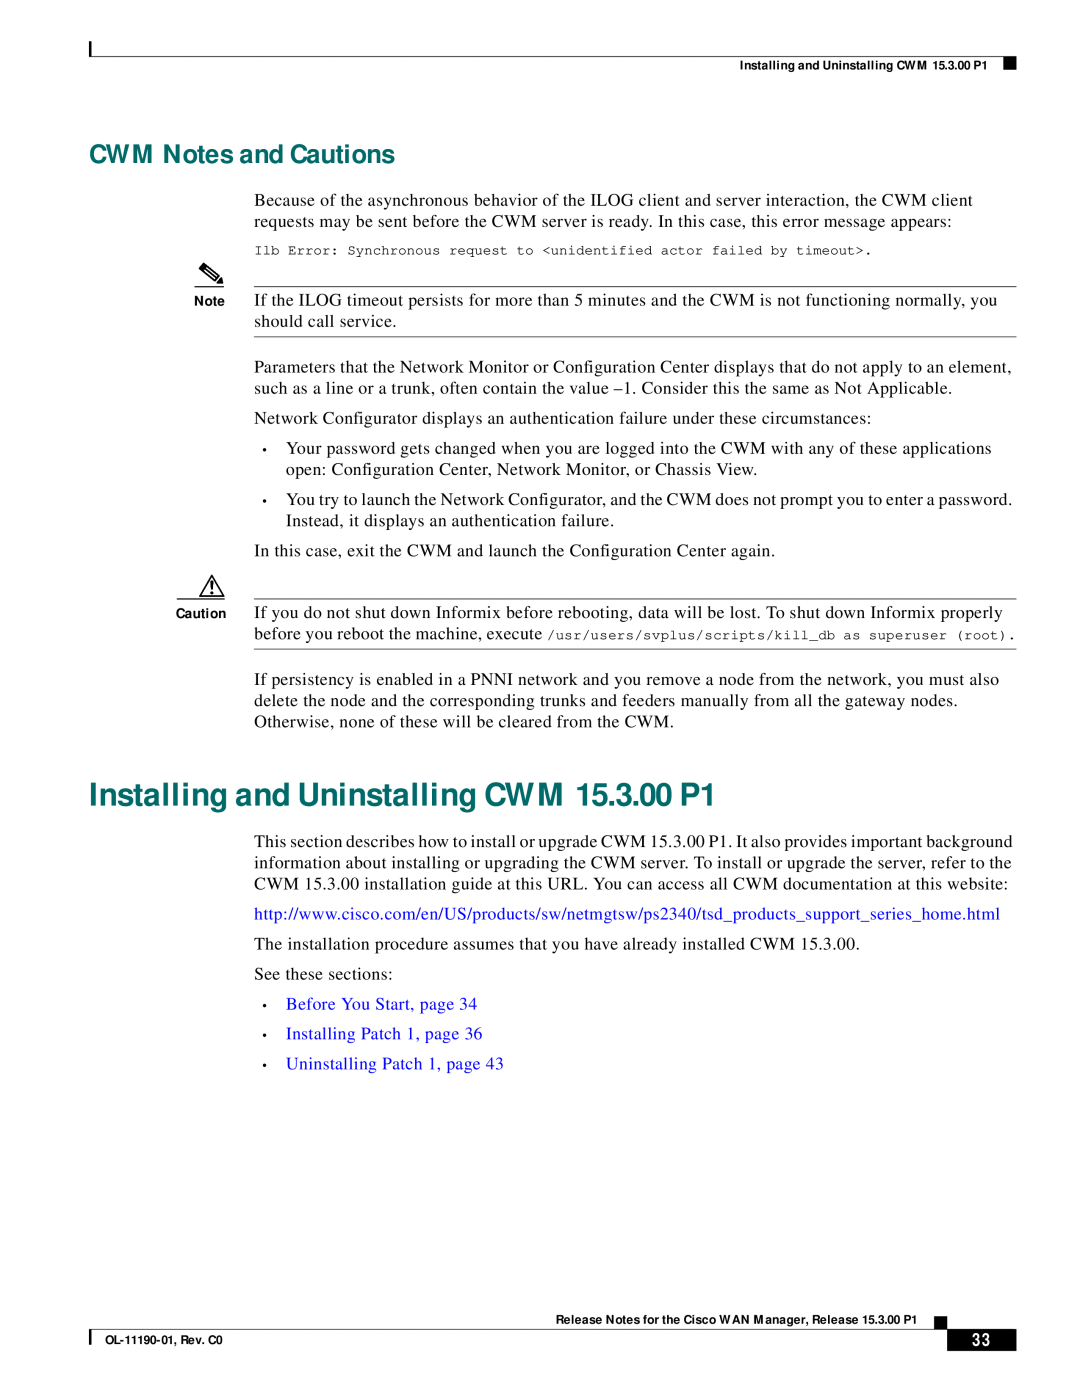 Cisco Systems 15.3.00P1 Installing and Uninstalling CWM 15.3.00 P1, CWM Notes and Cautions, Uninstalling Patch 1, page 